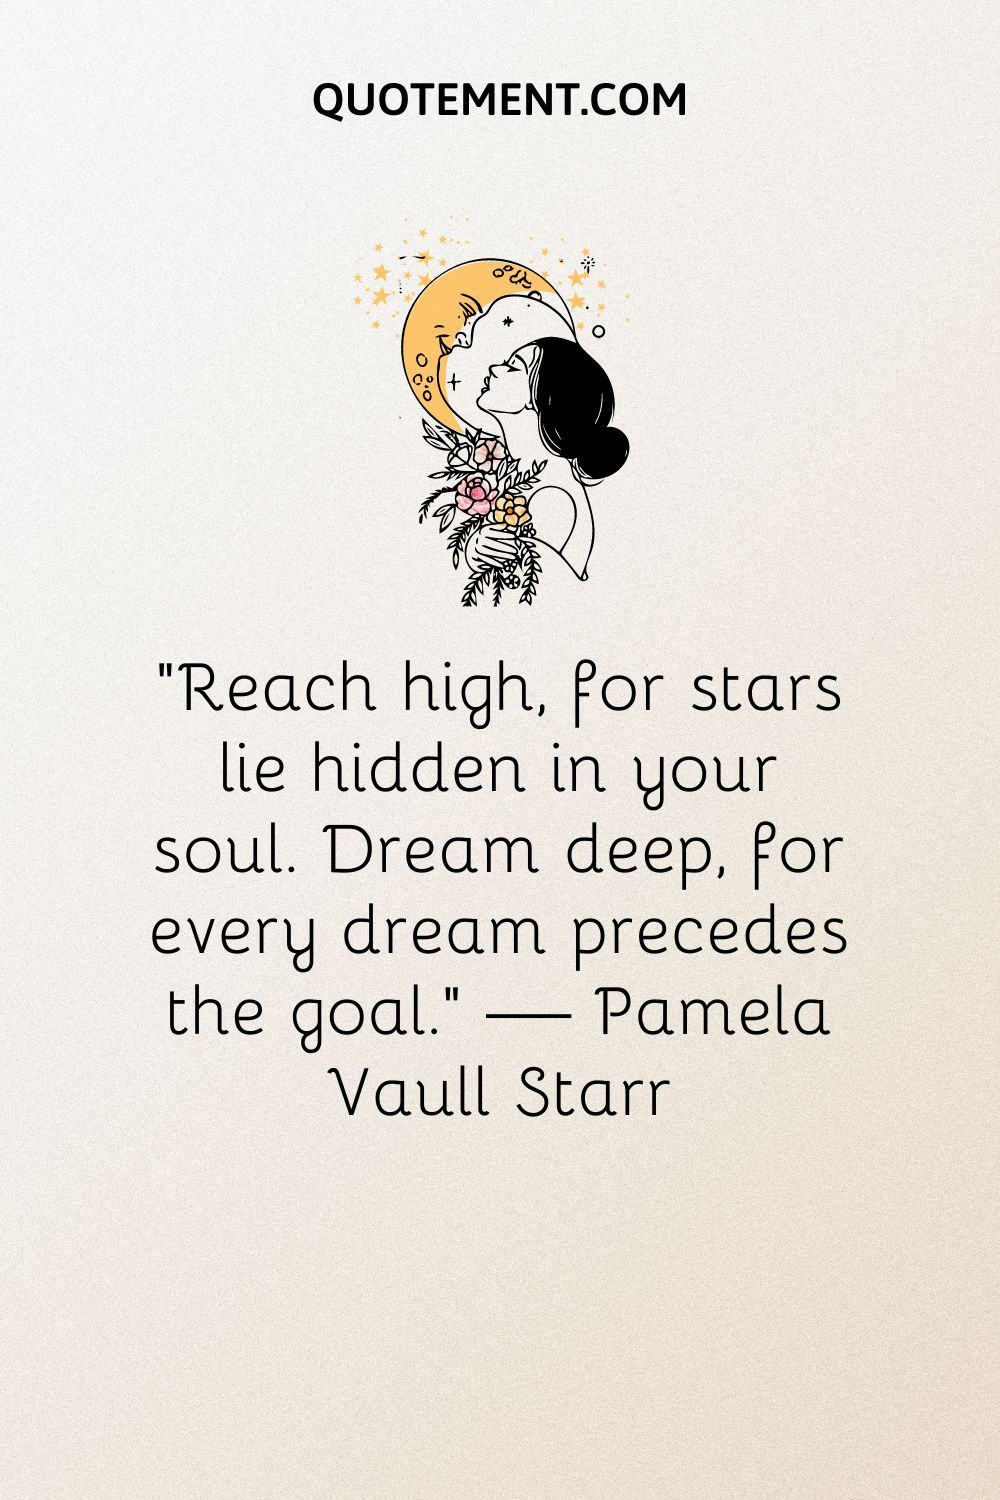 girl facing a smiling moon illustration representing inspirational quote about following your dreams